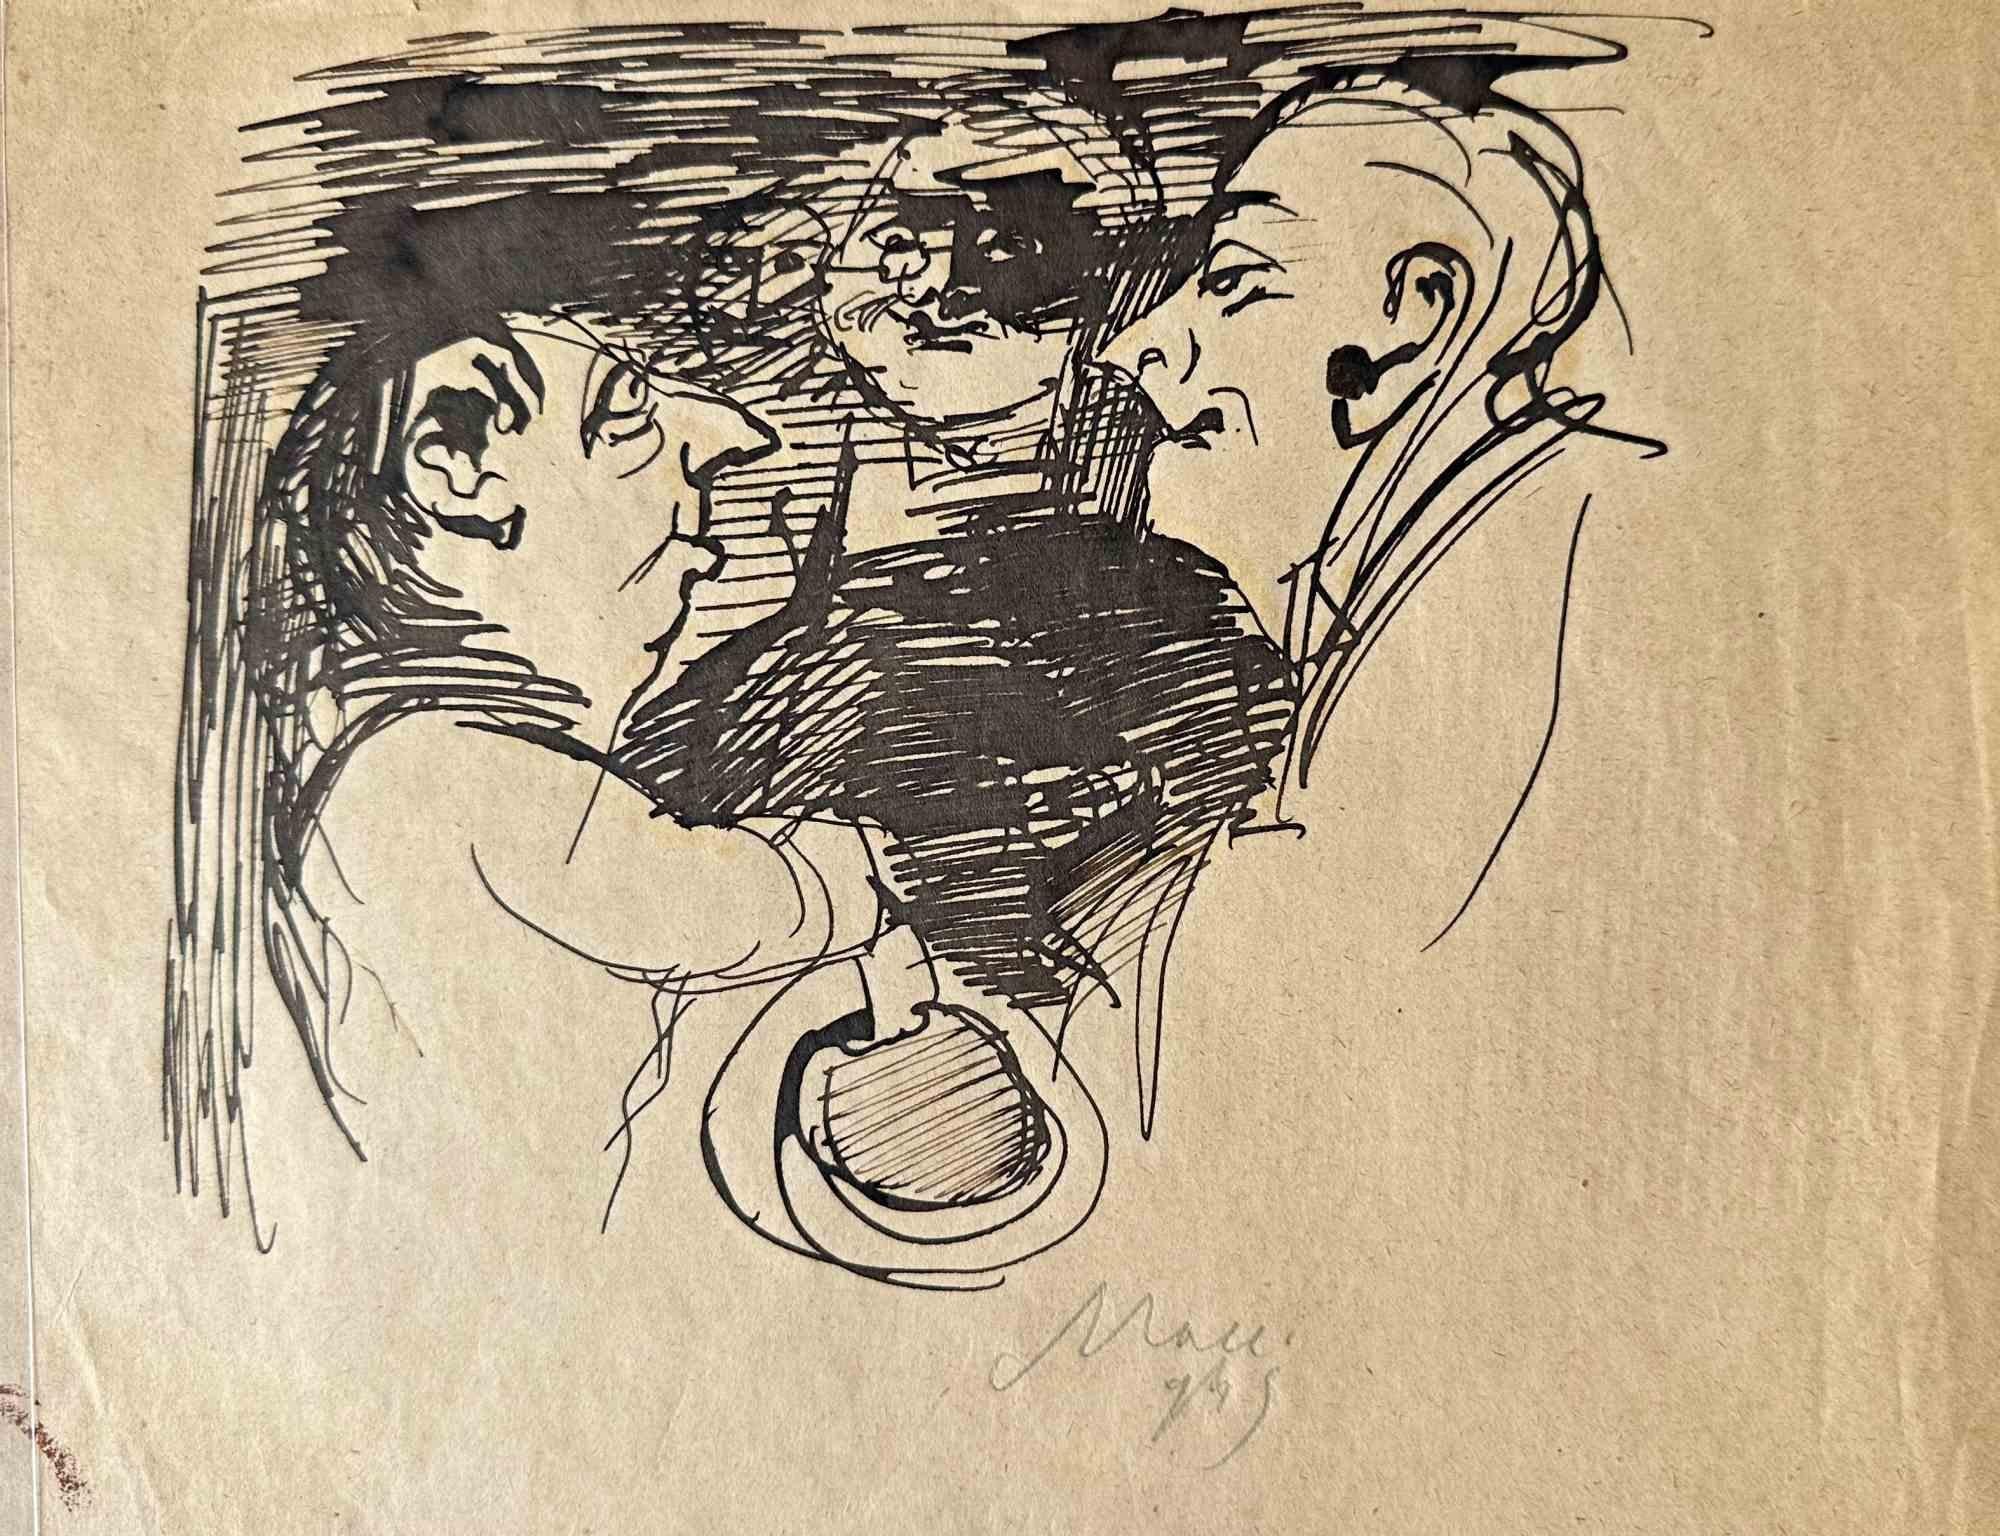 Figures is a China ink Drawing realized by Mino Maccari  (1924-1989) in 1945 ca.

Hand-signed on the lower.

Good conditions.

Mino Maccari (Siena, 1924-Rome, June 16, 1989) was an Italian writer, painter, engraver and journalist, winner of the